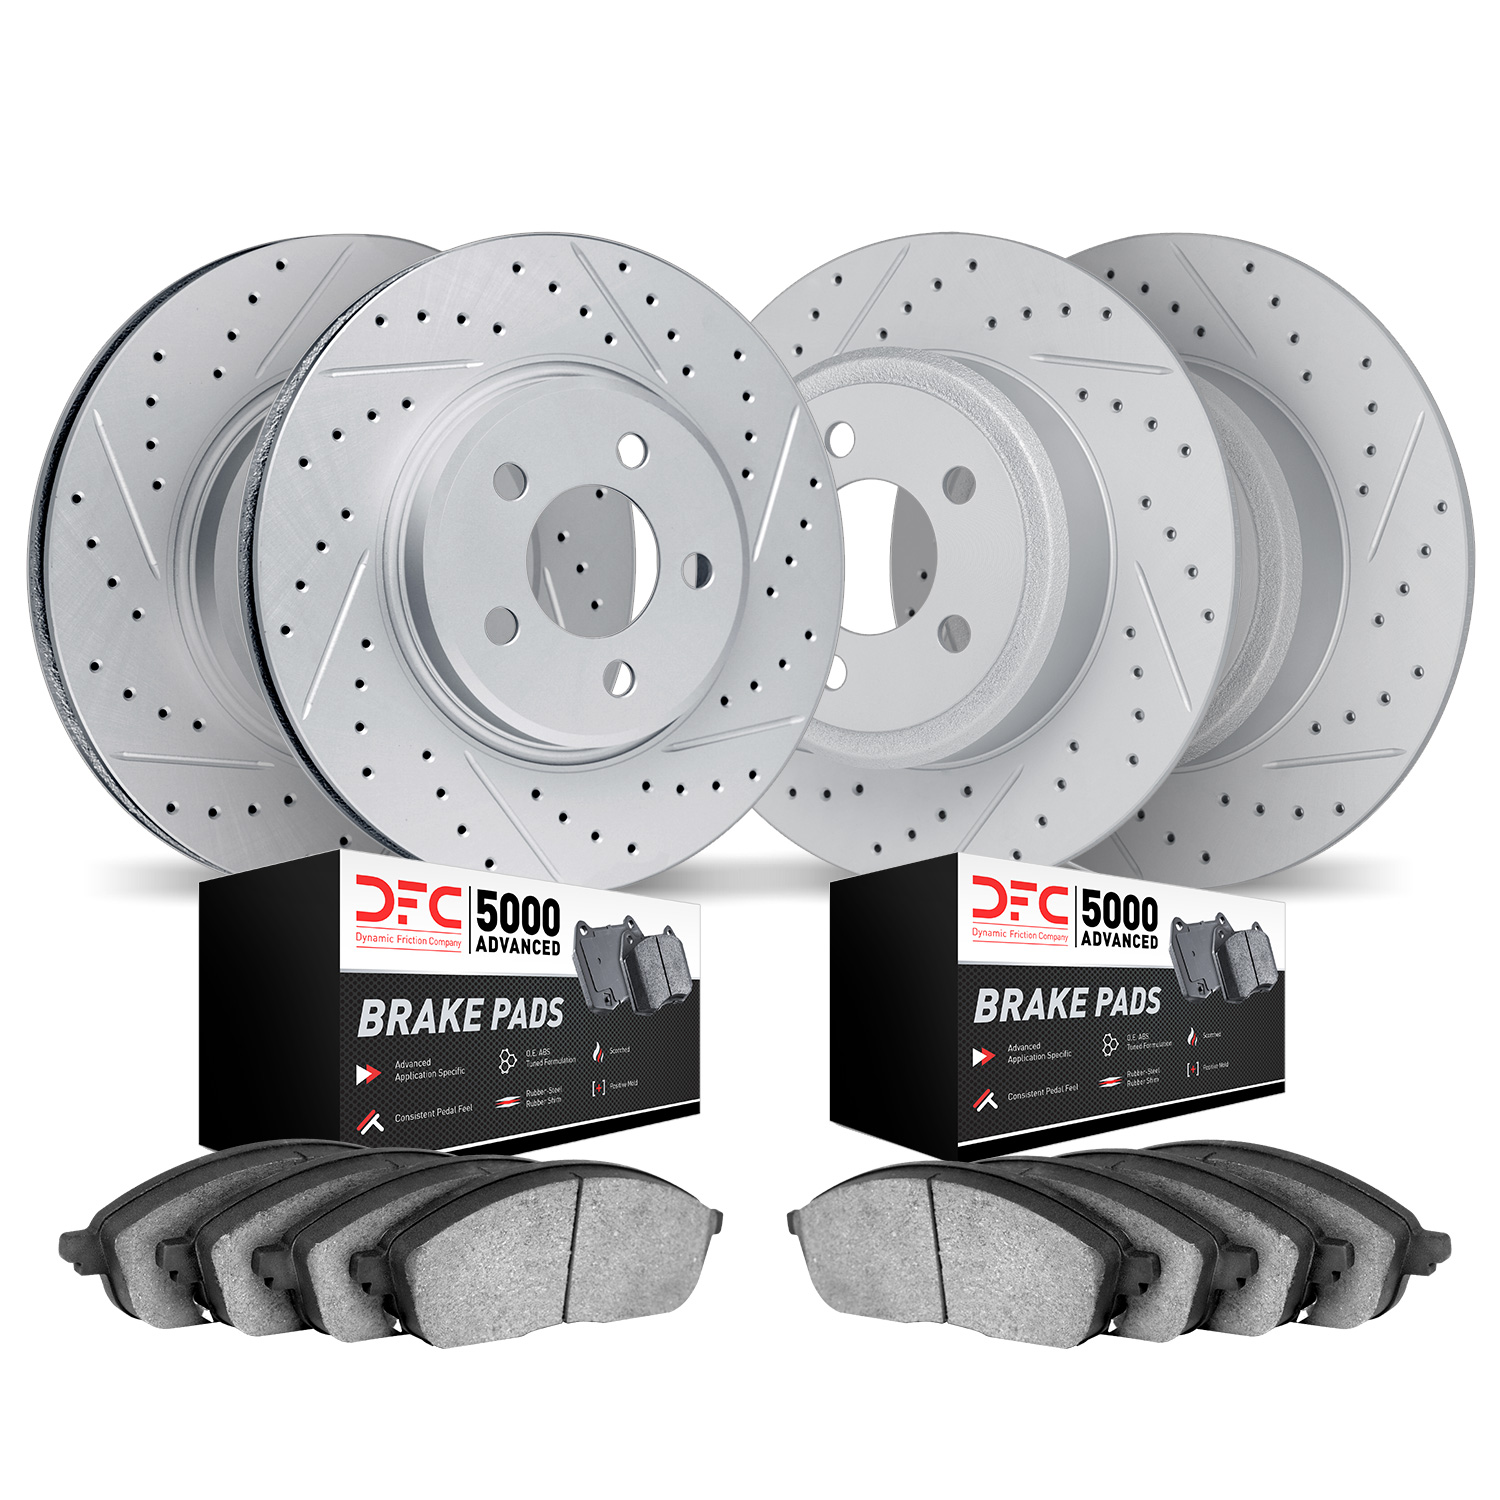 2504-54215 Geoperformance Drilled/Slotted Rotors w/5000 Advanced Brake Pads Kit, 2013-2020 Ford/Lincoln/Mercury/Mazda, Position: